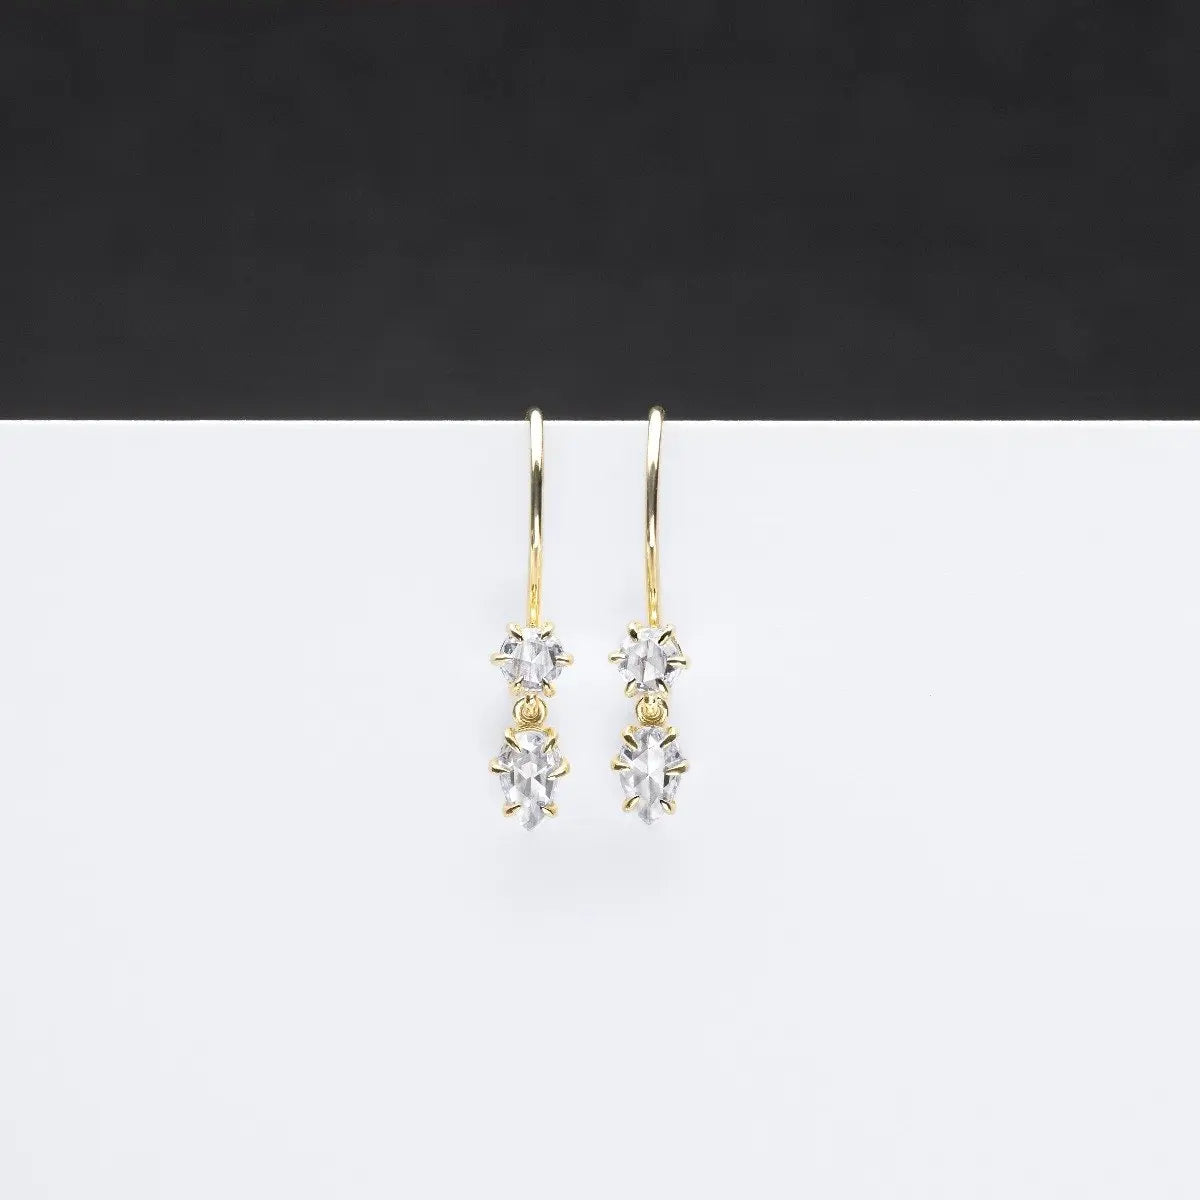 Primary Earrings - Squash Blossom Vail